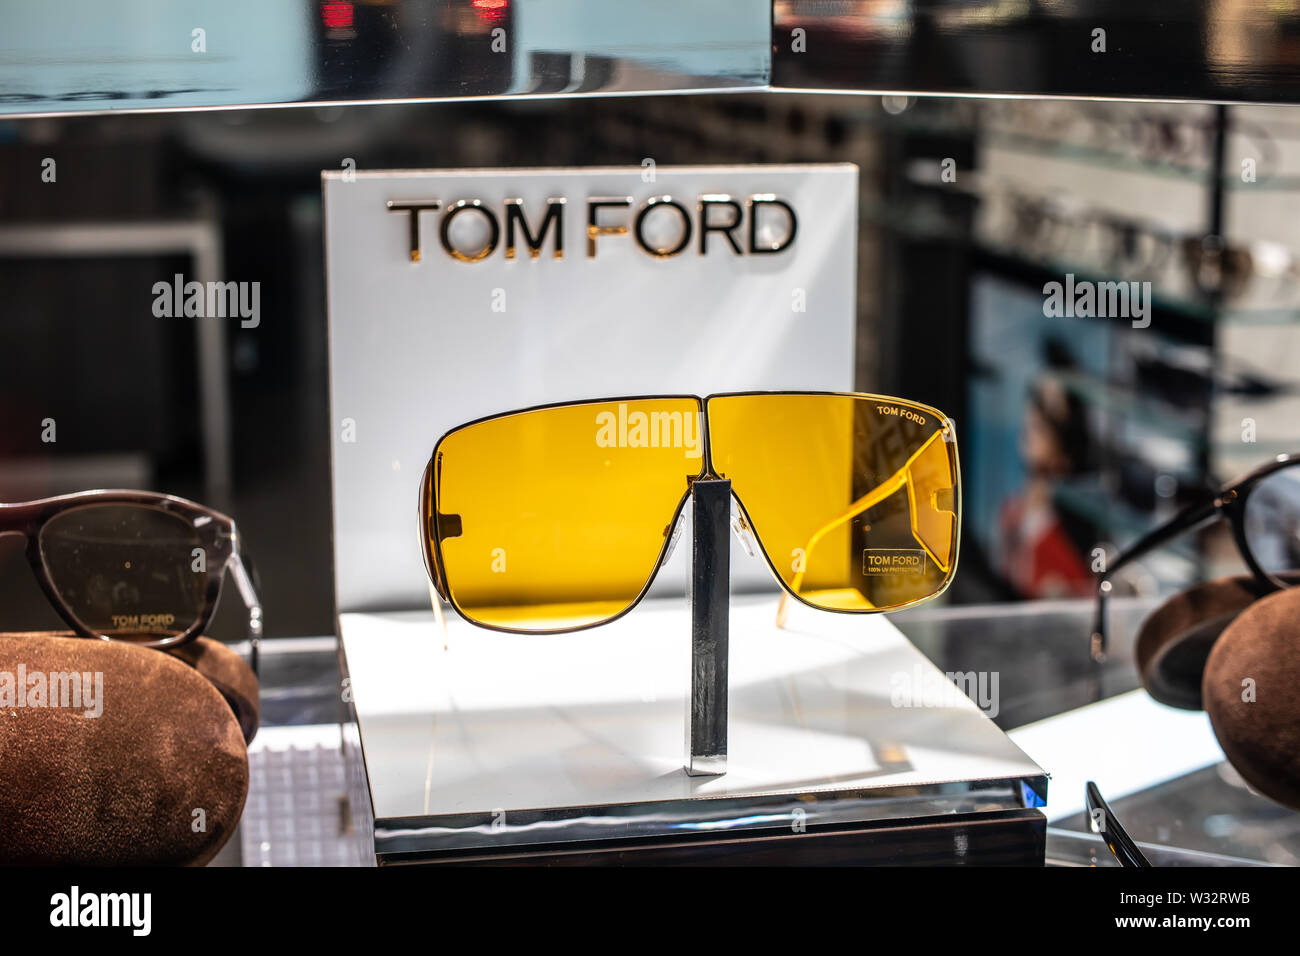 Tom Ford Sunglasses High Resolution Stock Photography and Images - Alamy